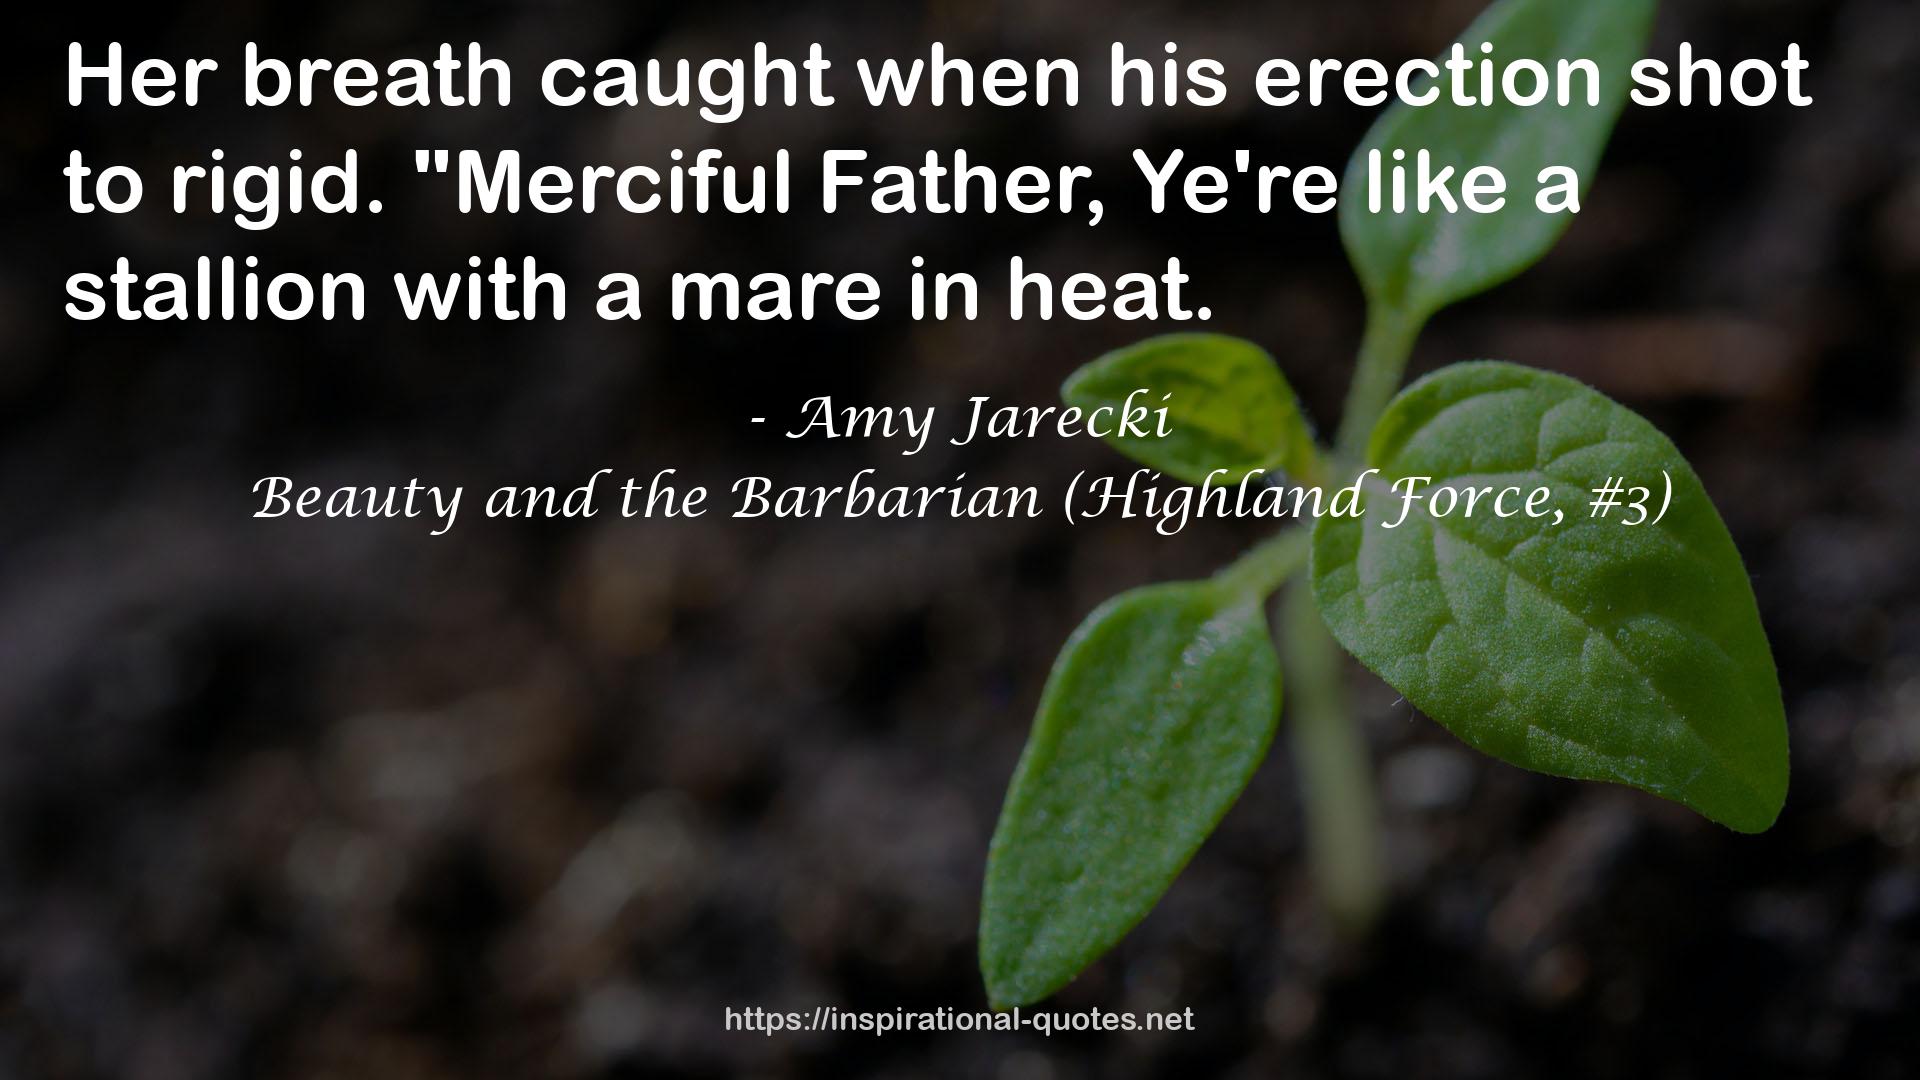 Beauty and the Barbarian (Highland Force, #3) QUOTES